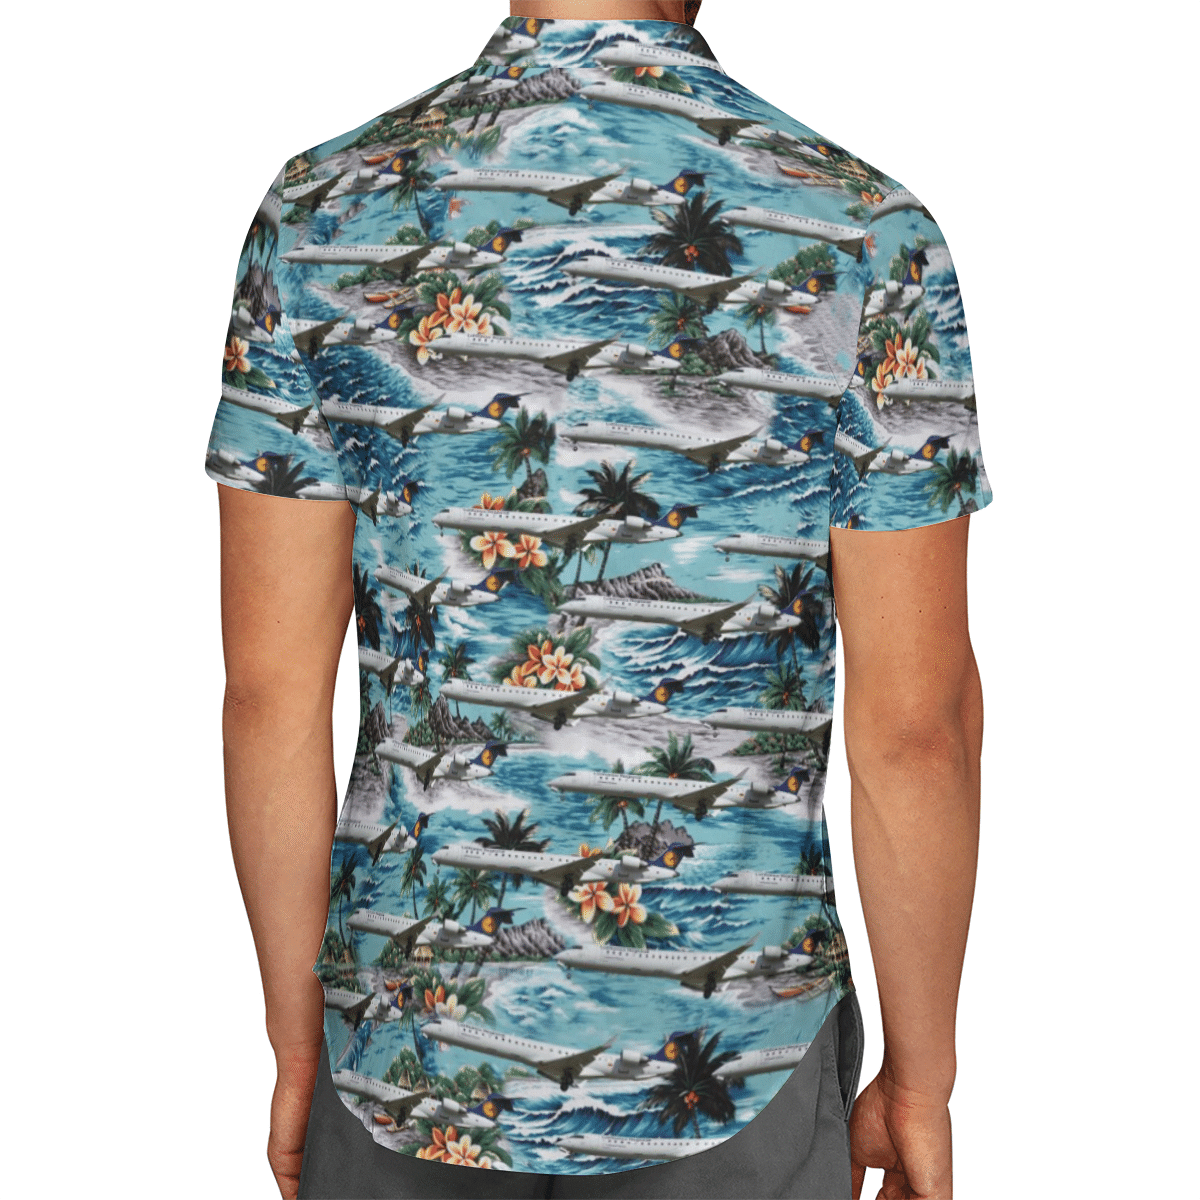 Going to the beach with a quality shirt 191